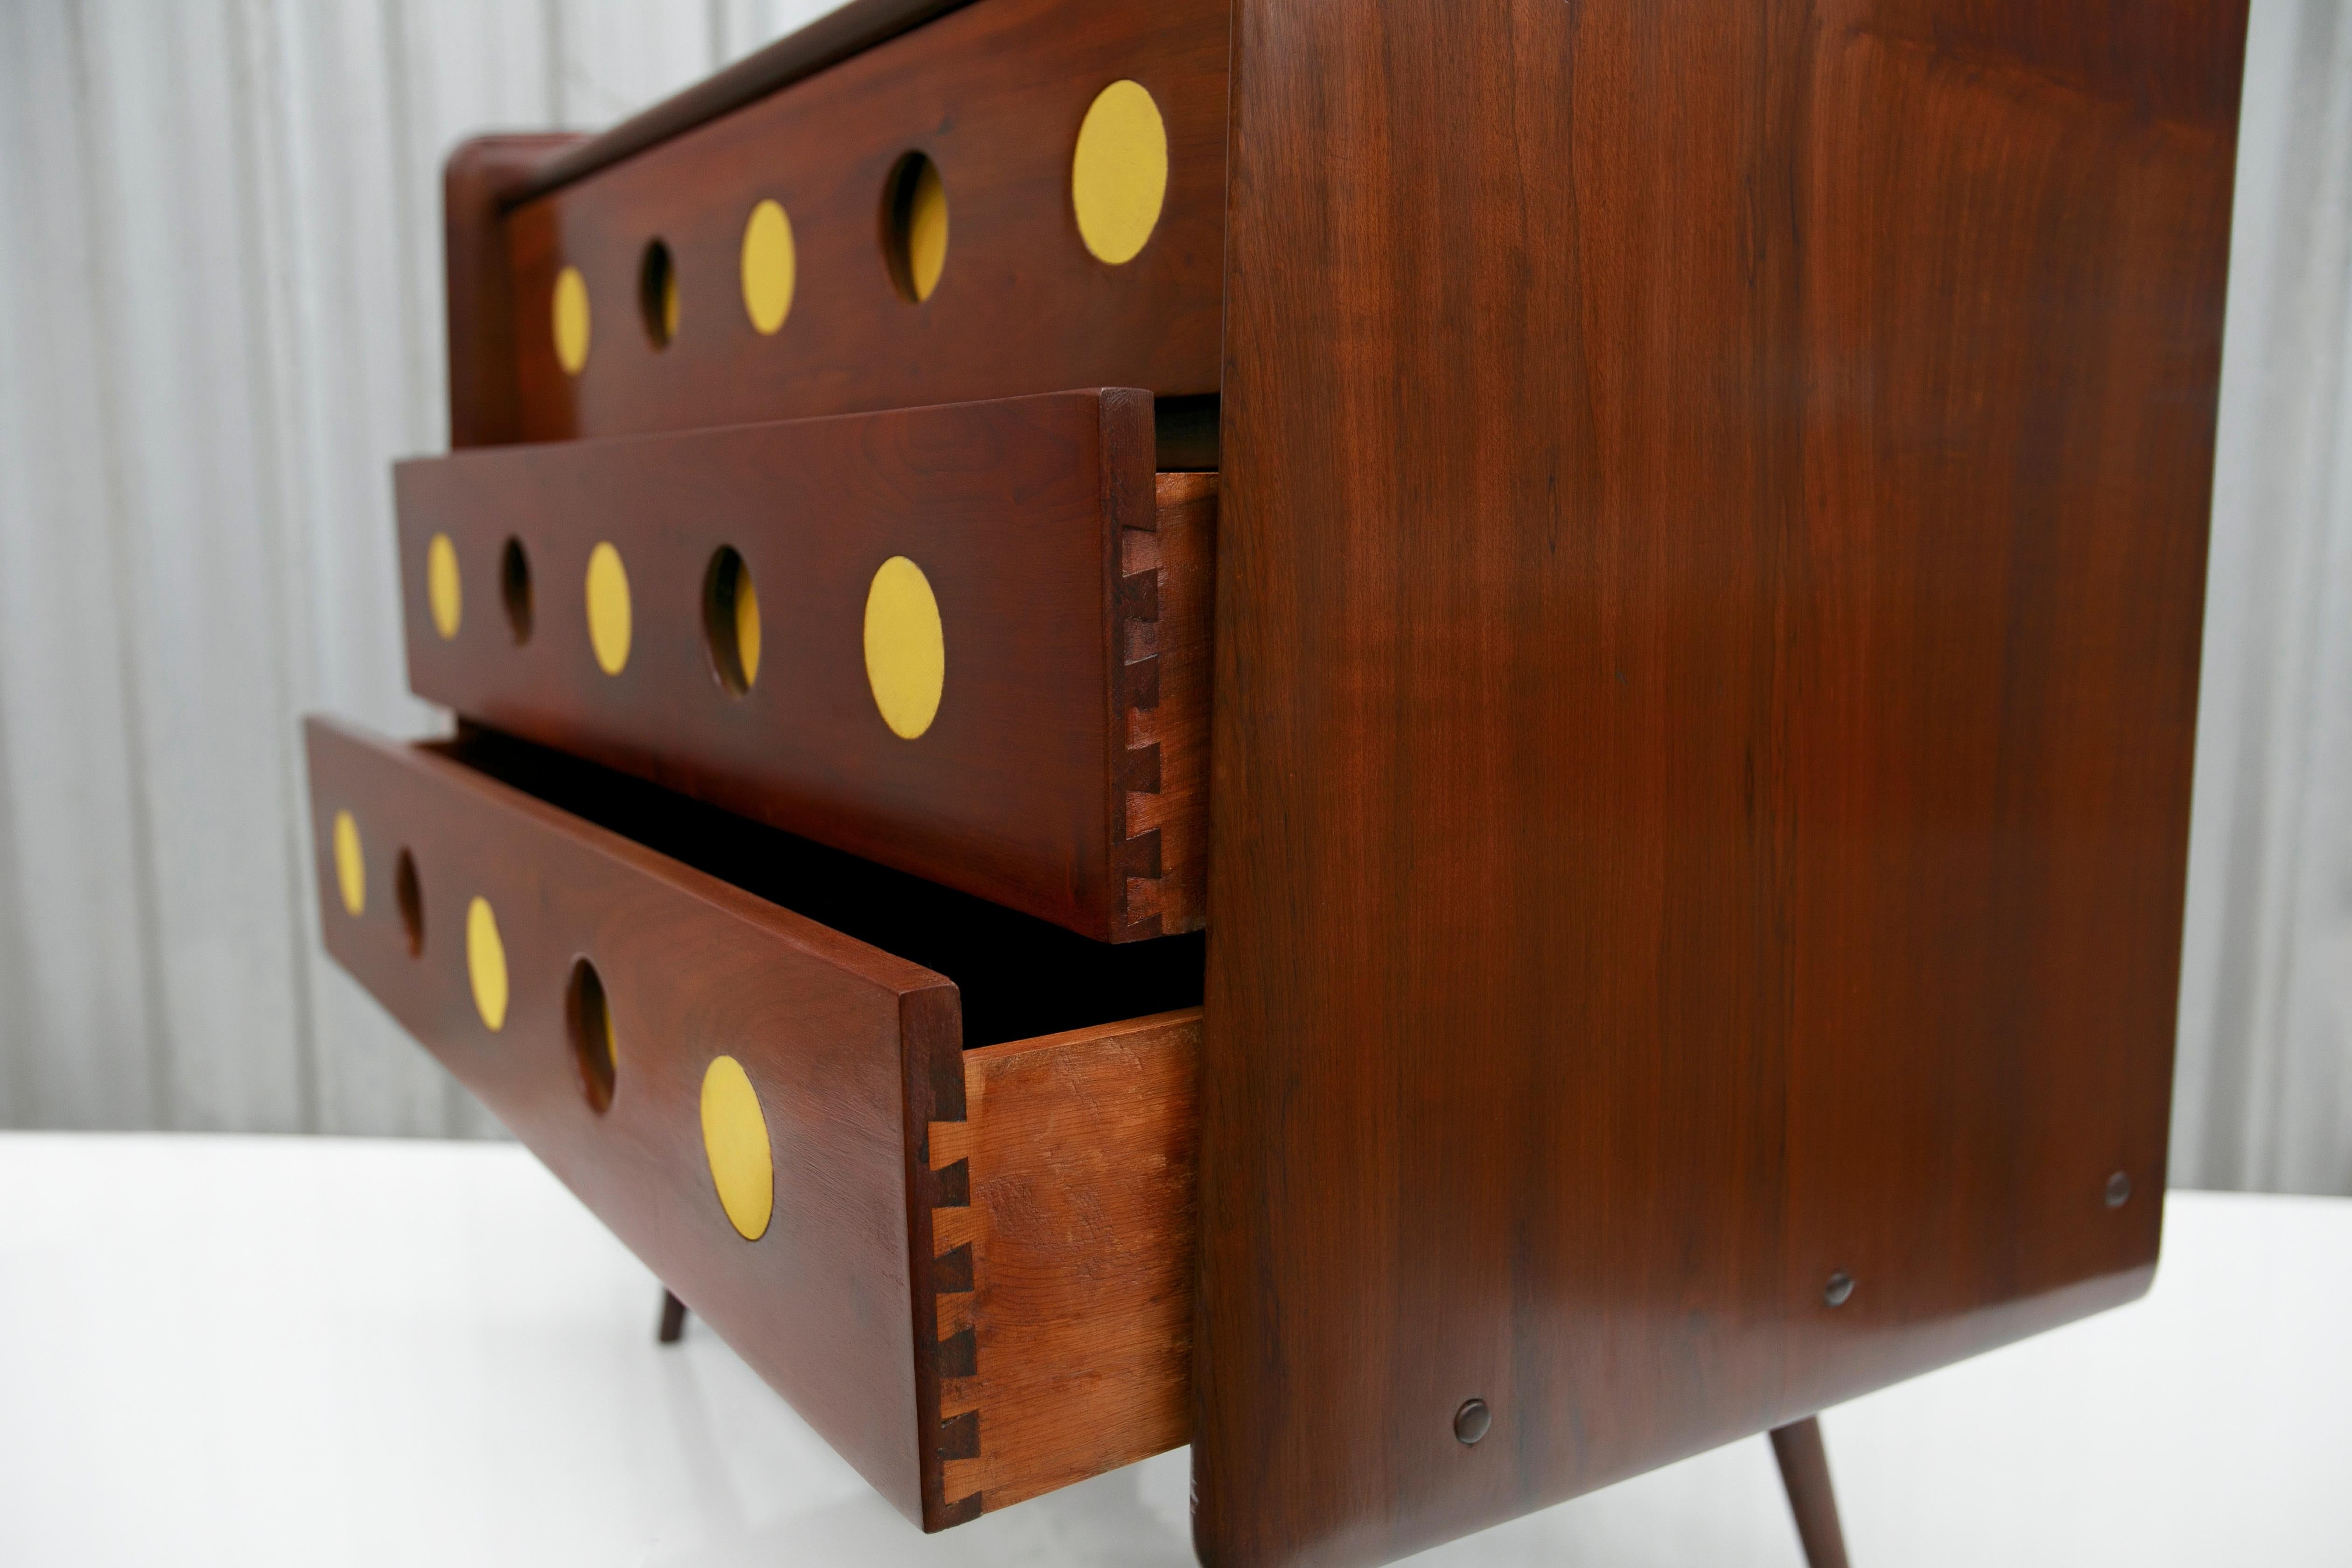 Hand-Carved Brazilian Modern Chest of Drawers in Hardwood by Moveis Cimo, 1950s, Brazil